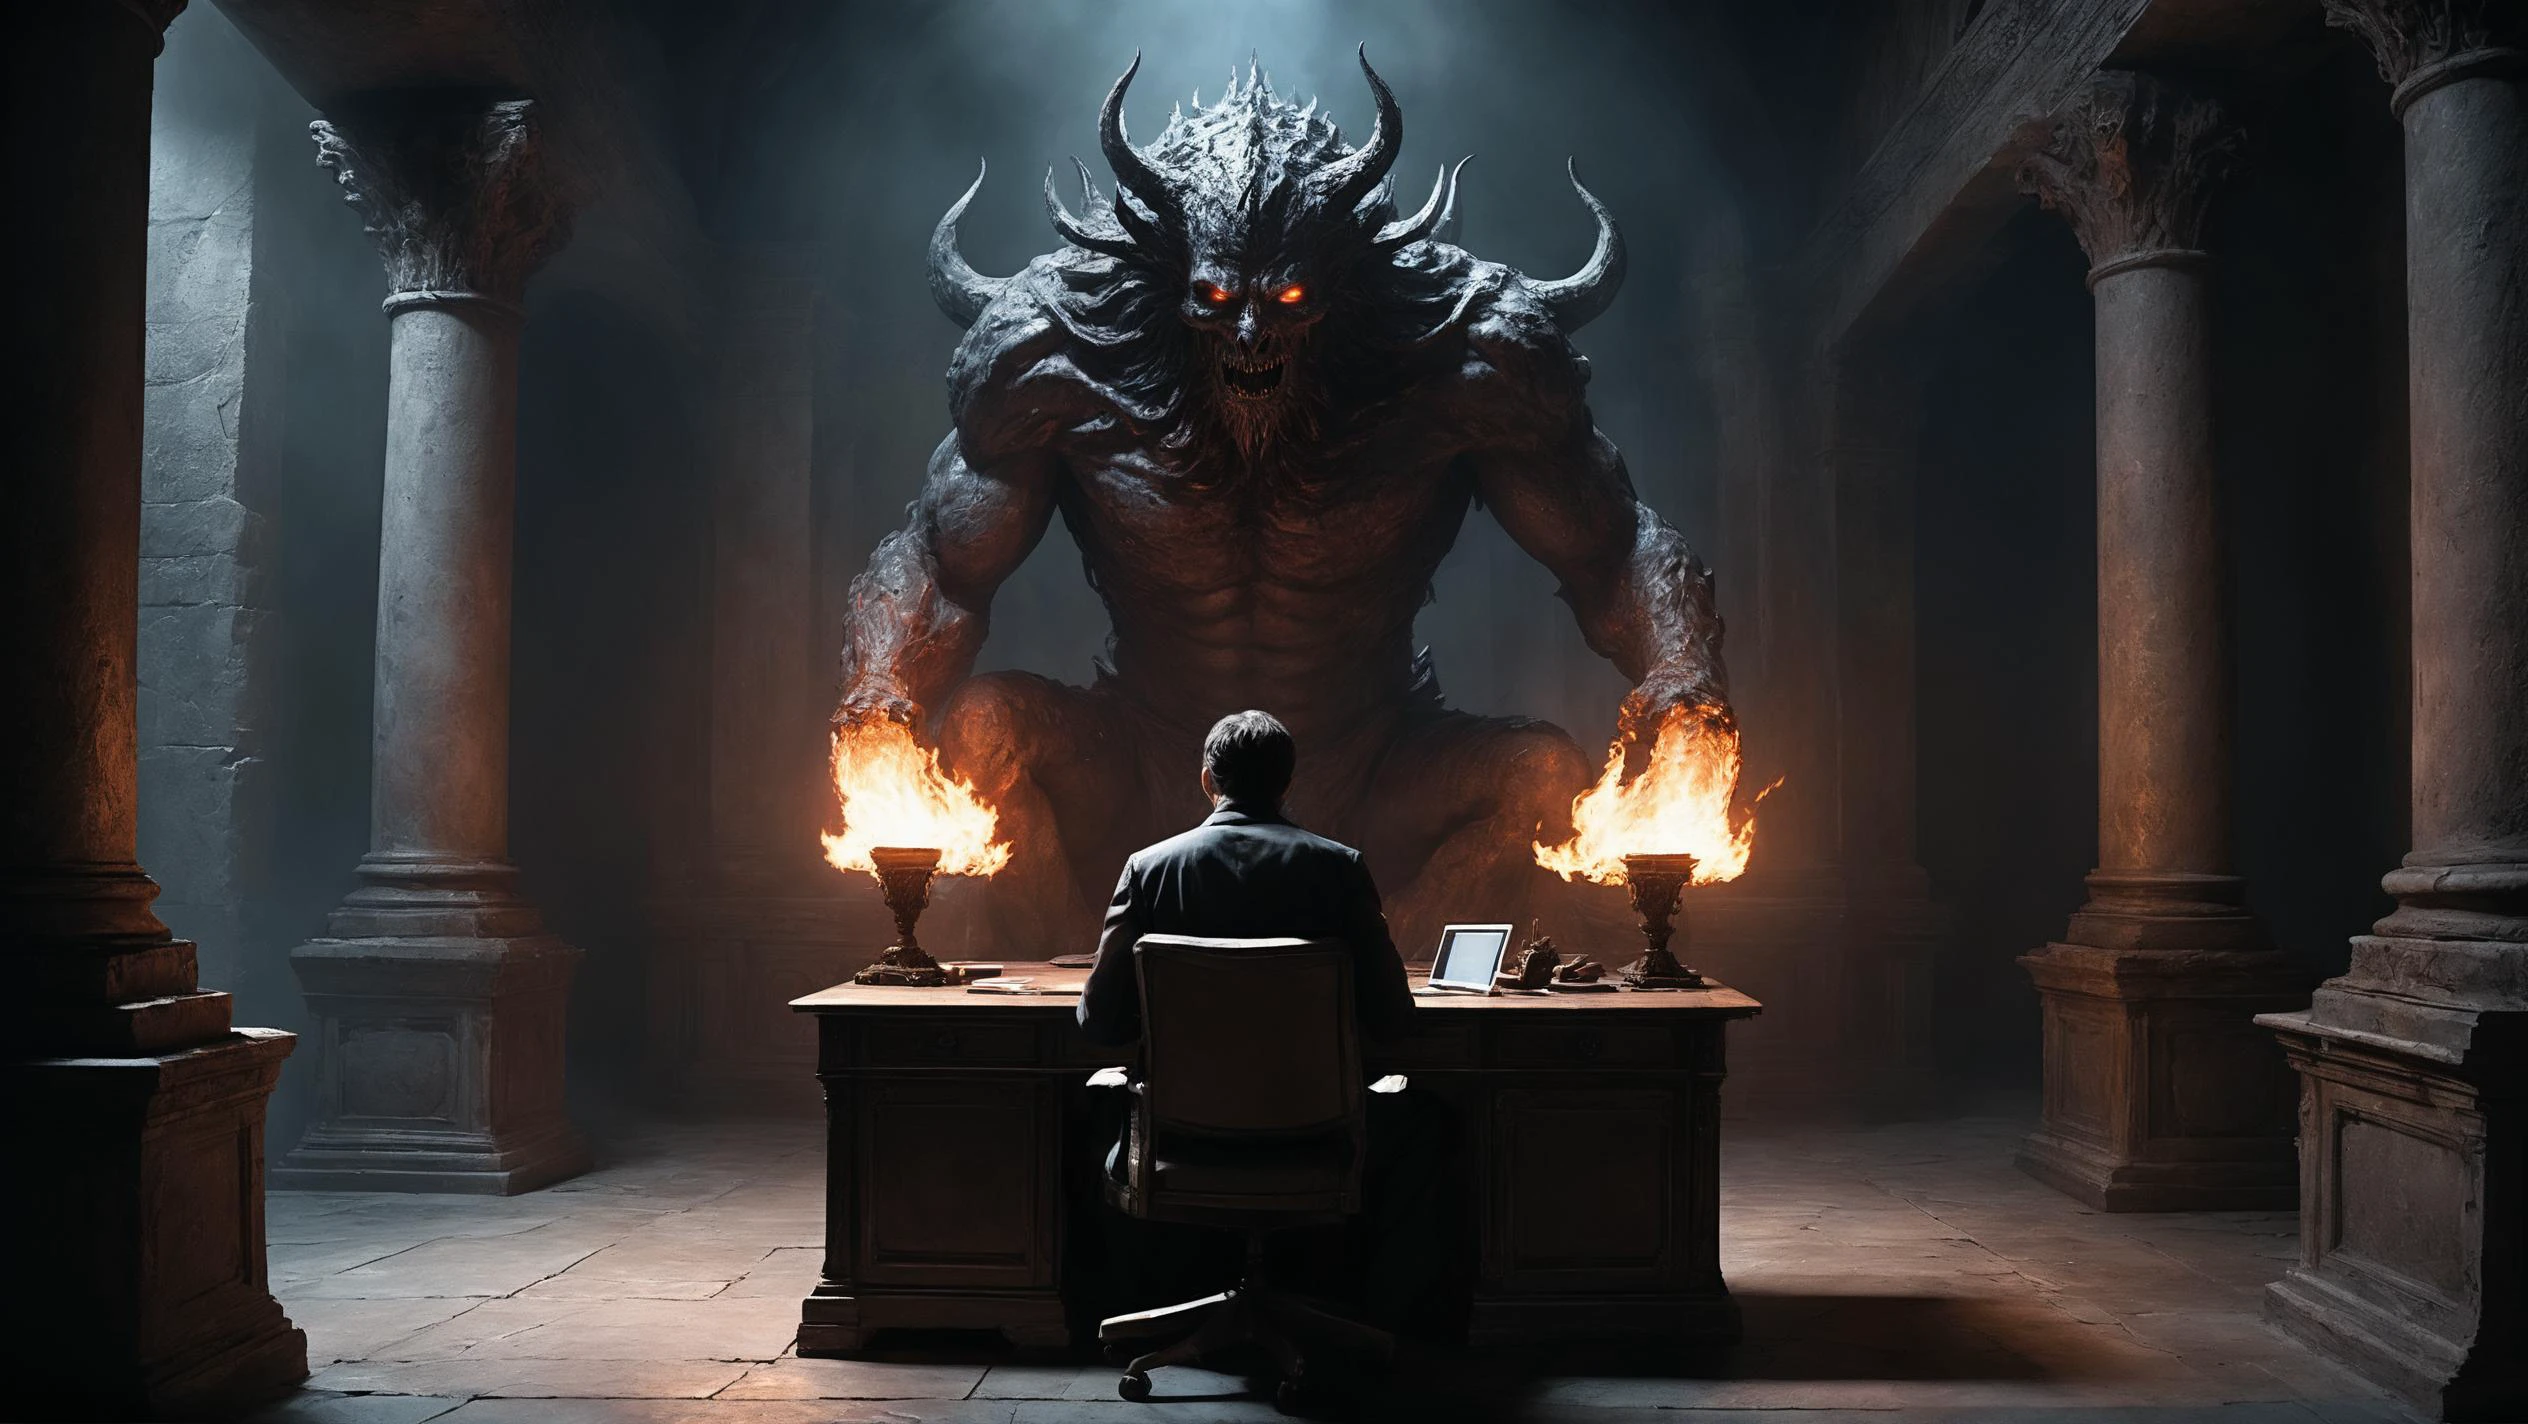 (a man sitting at a desk using an ultra wide screen monitor.:2.1) lit torches, dimly lit.  expansive, dimly lit room with high ceilings and ancient, ornate architecture. colossal, fiery gateway that has just opened behind him. The gateway to hell is characterized by intense, swirling flames and a menacing, dark abyss that seems to pulsate with malevolent energy. The room is cast in eerie shadows, with the only light emanating from the hellish portal, reflecting off the man's determined face and the intricate stone walls around him. The atmosphere is charged with a foreboding sense of impending doom, yet the man remains resolute and unfazed by the infernal scene he has conjured.